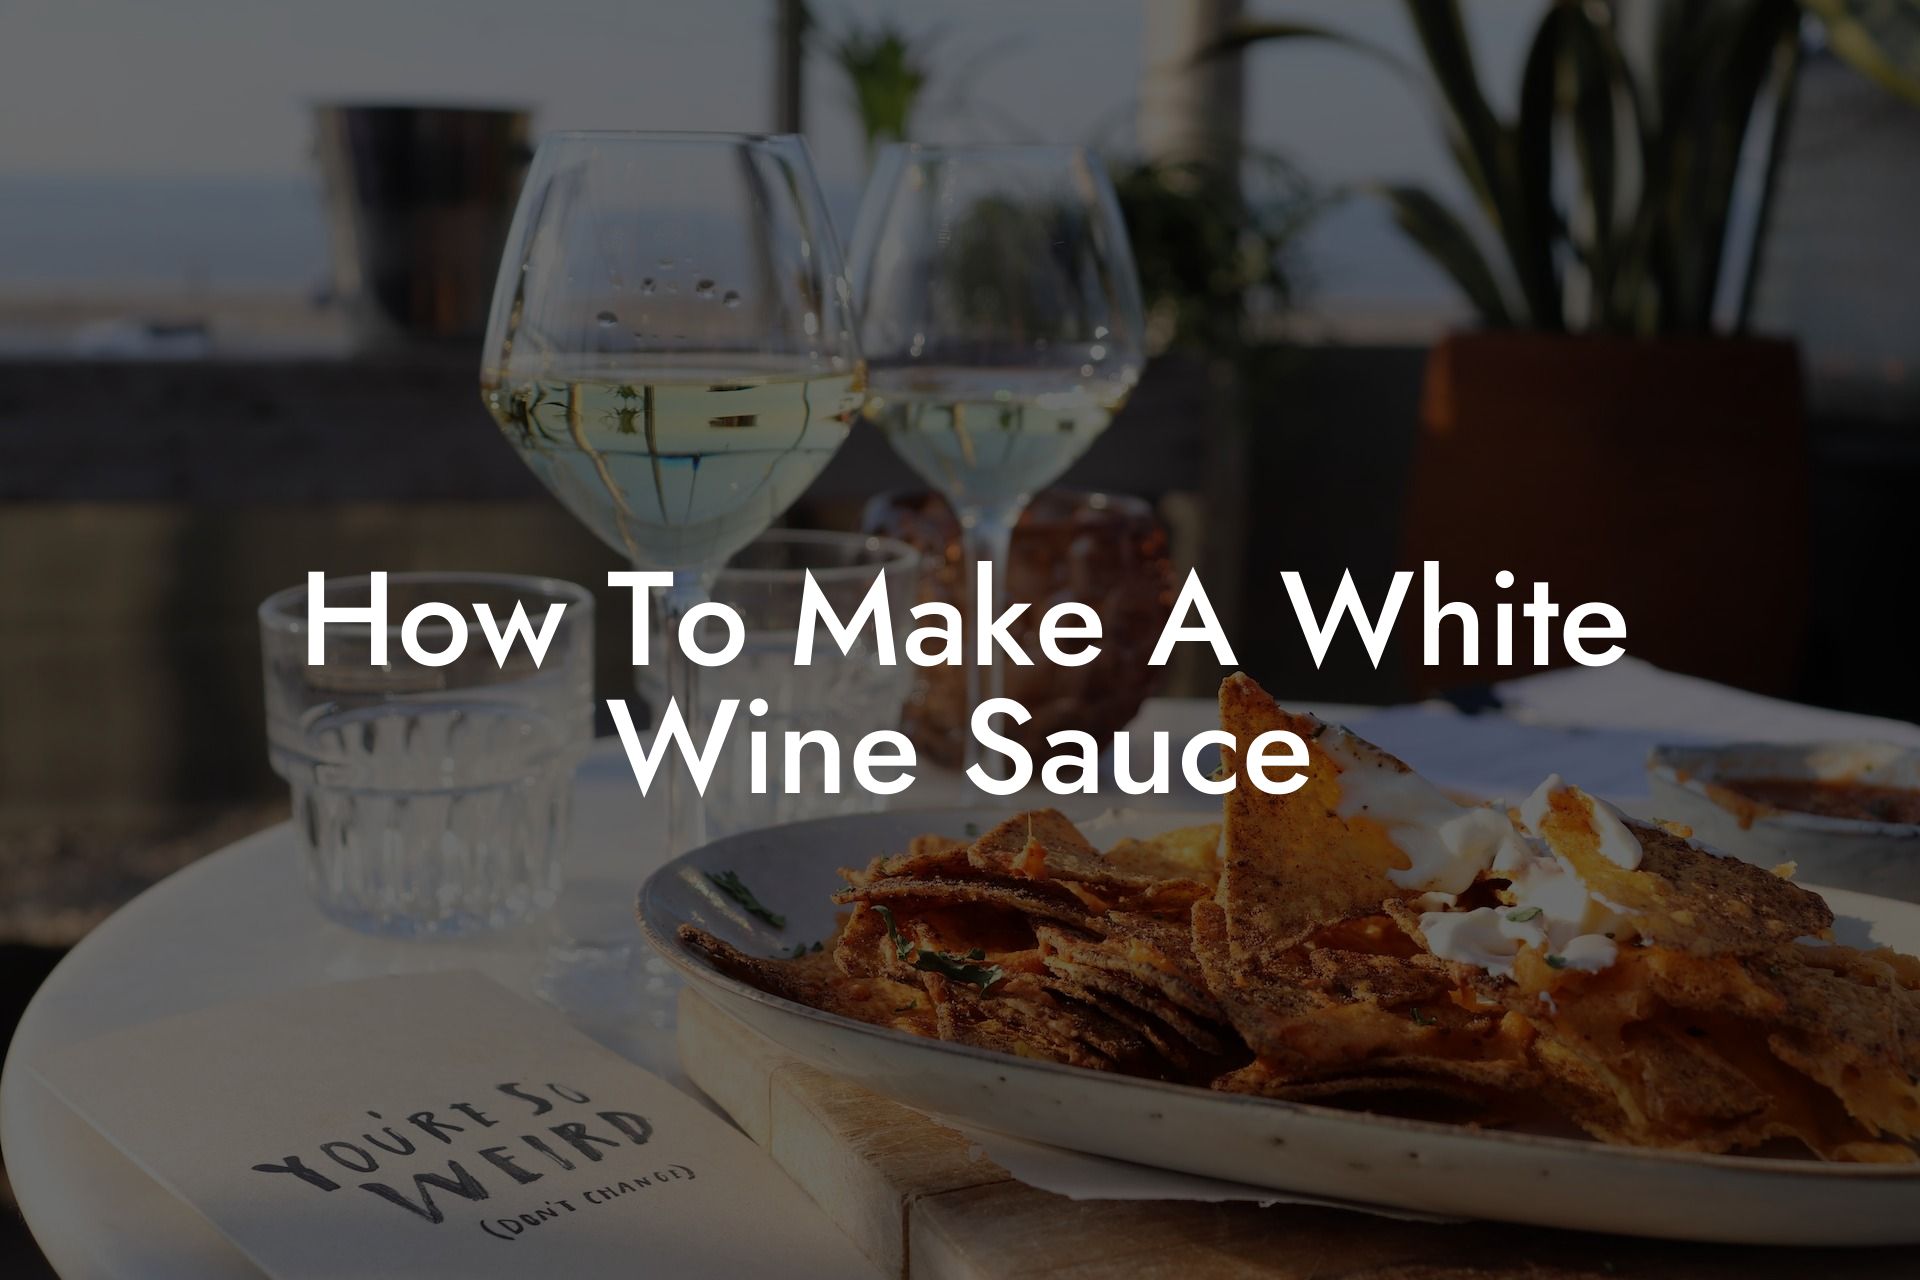 How To Make A White Wine Sauce